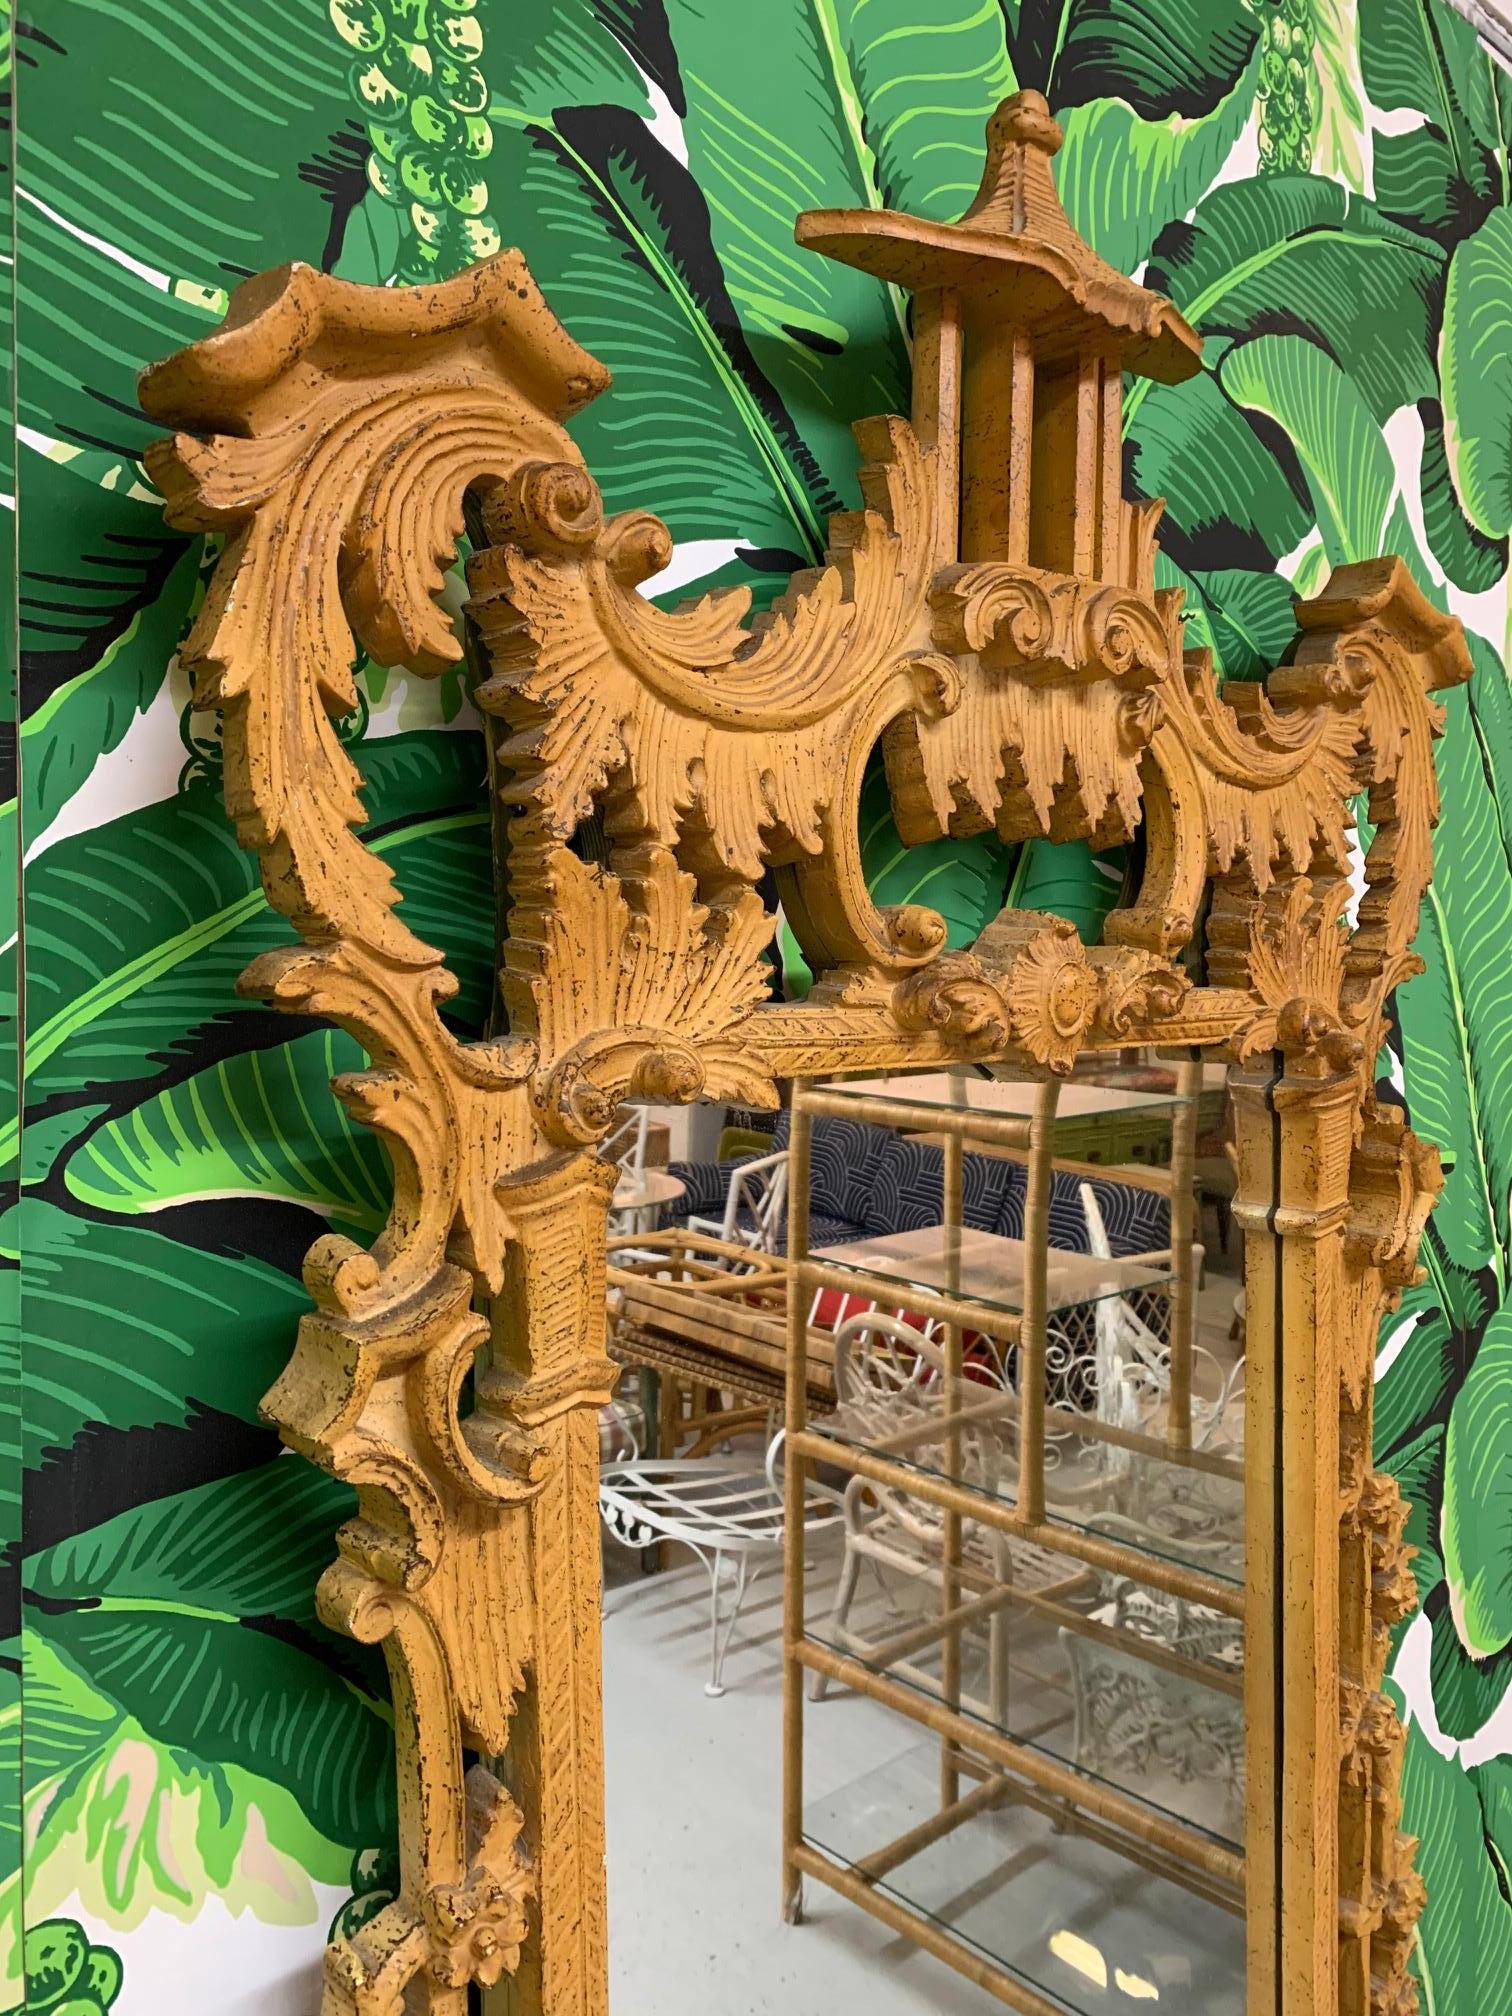 Large pagoda style wall mirror by Gampel-Stoll offers any decor a touch of Asian chinoiserie style. Carved wood and heavy wood backing. Very good condition with only very minor imperfections consistent with age.